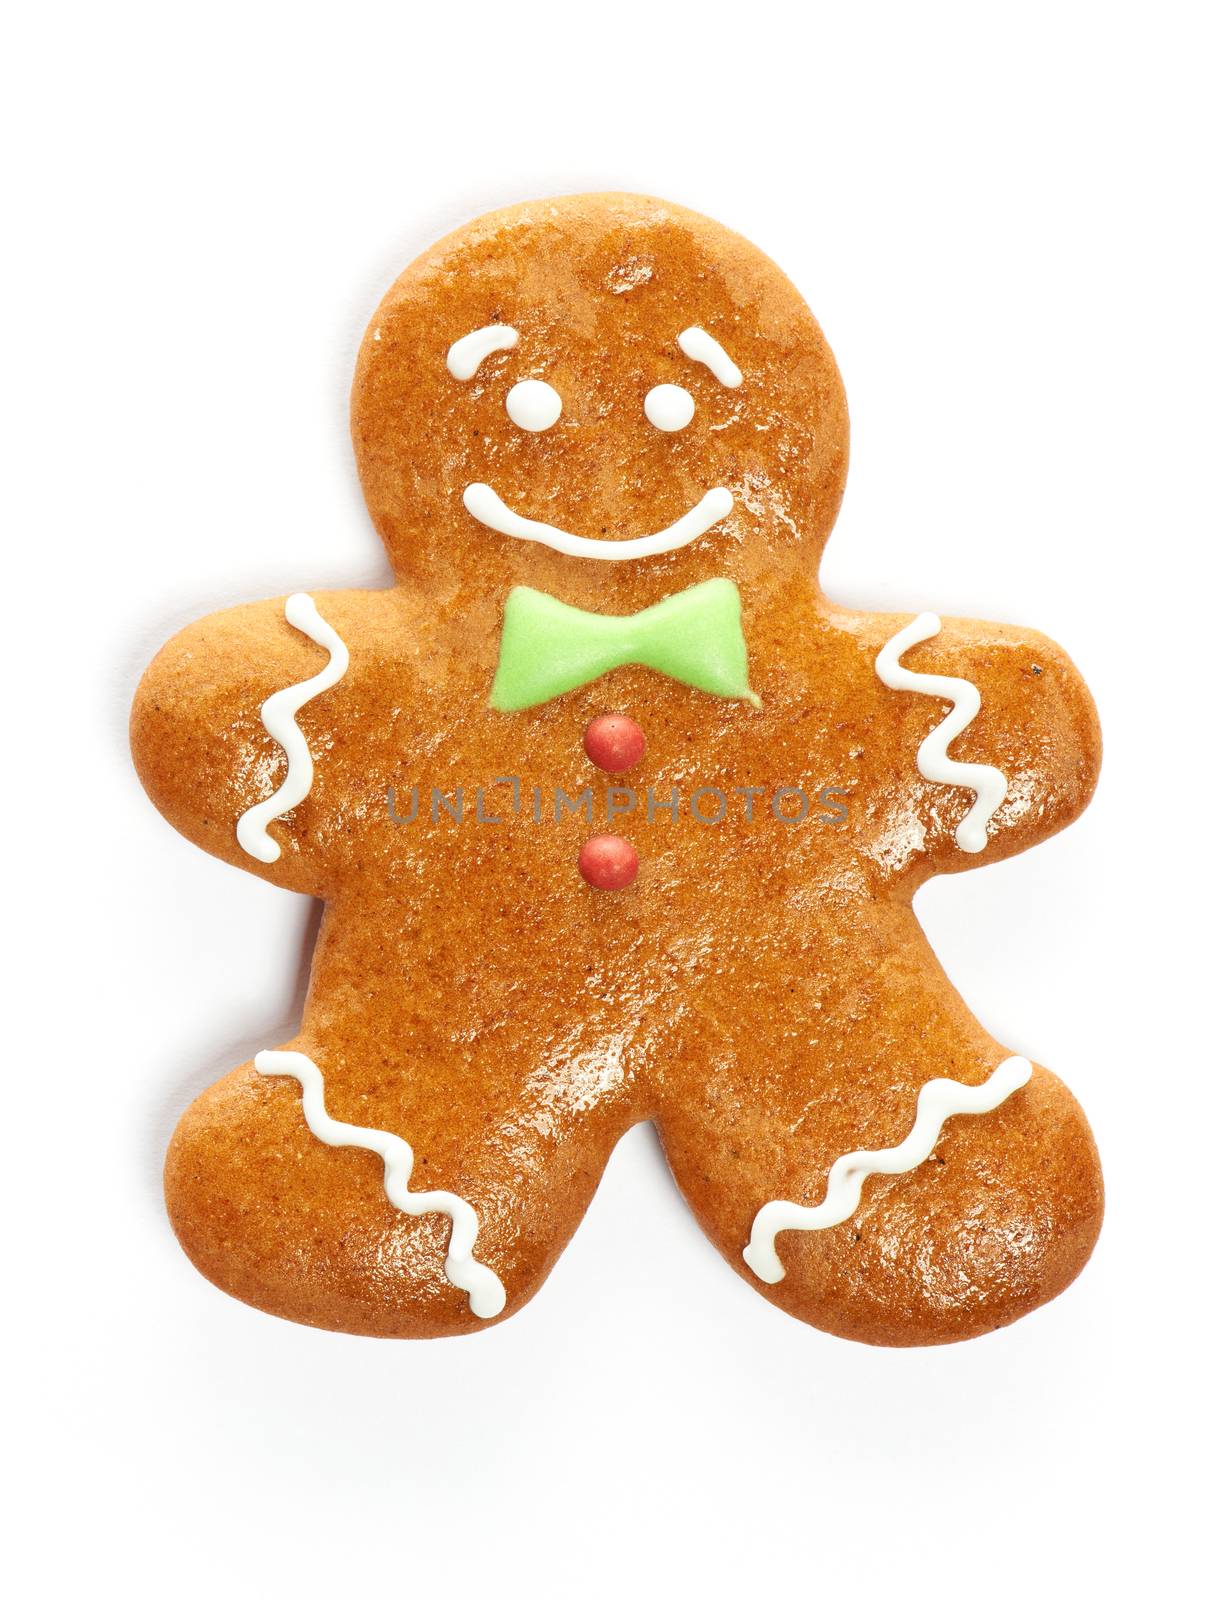 Christmas gingerbread man cookie by haveseen